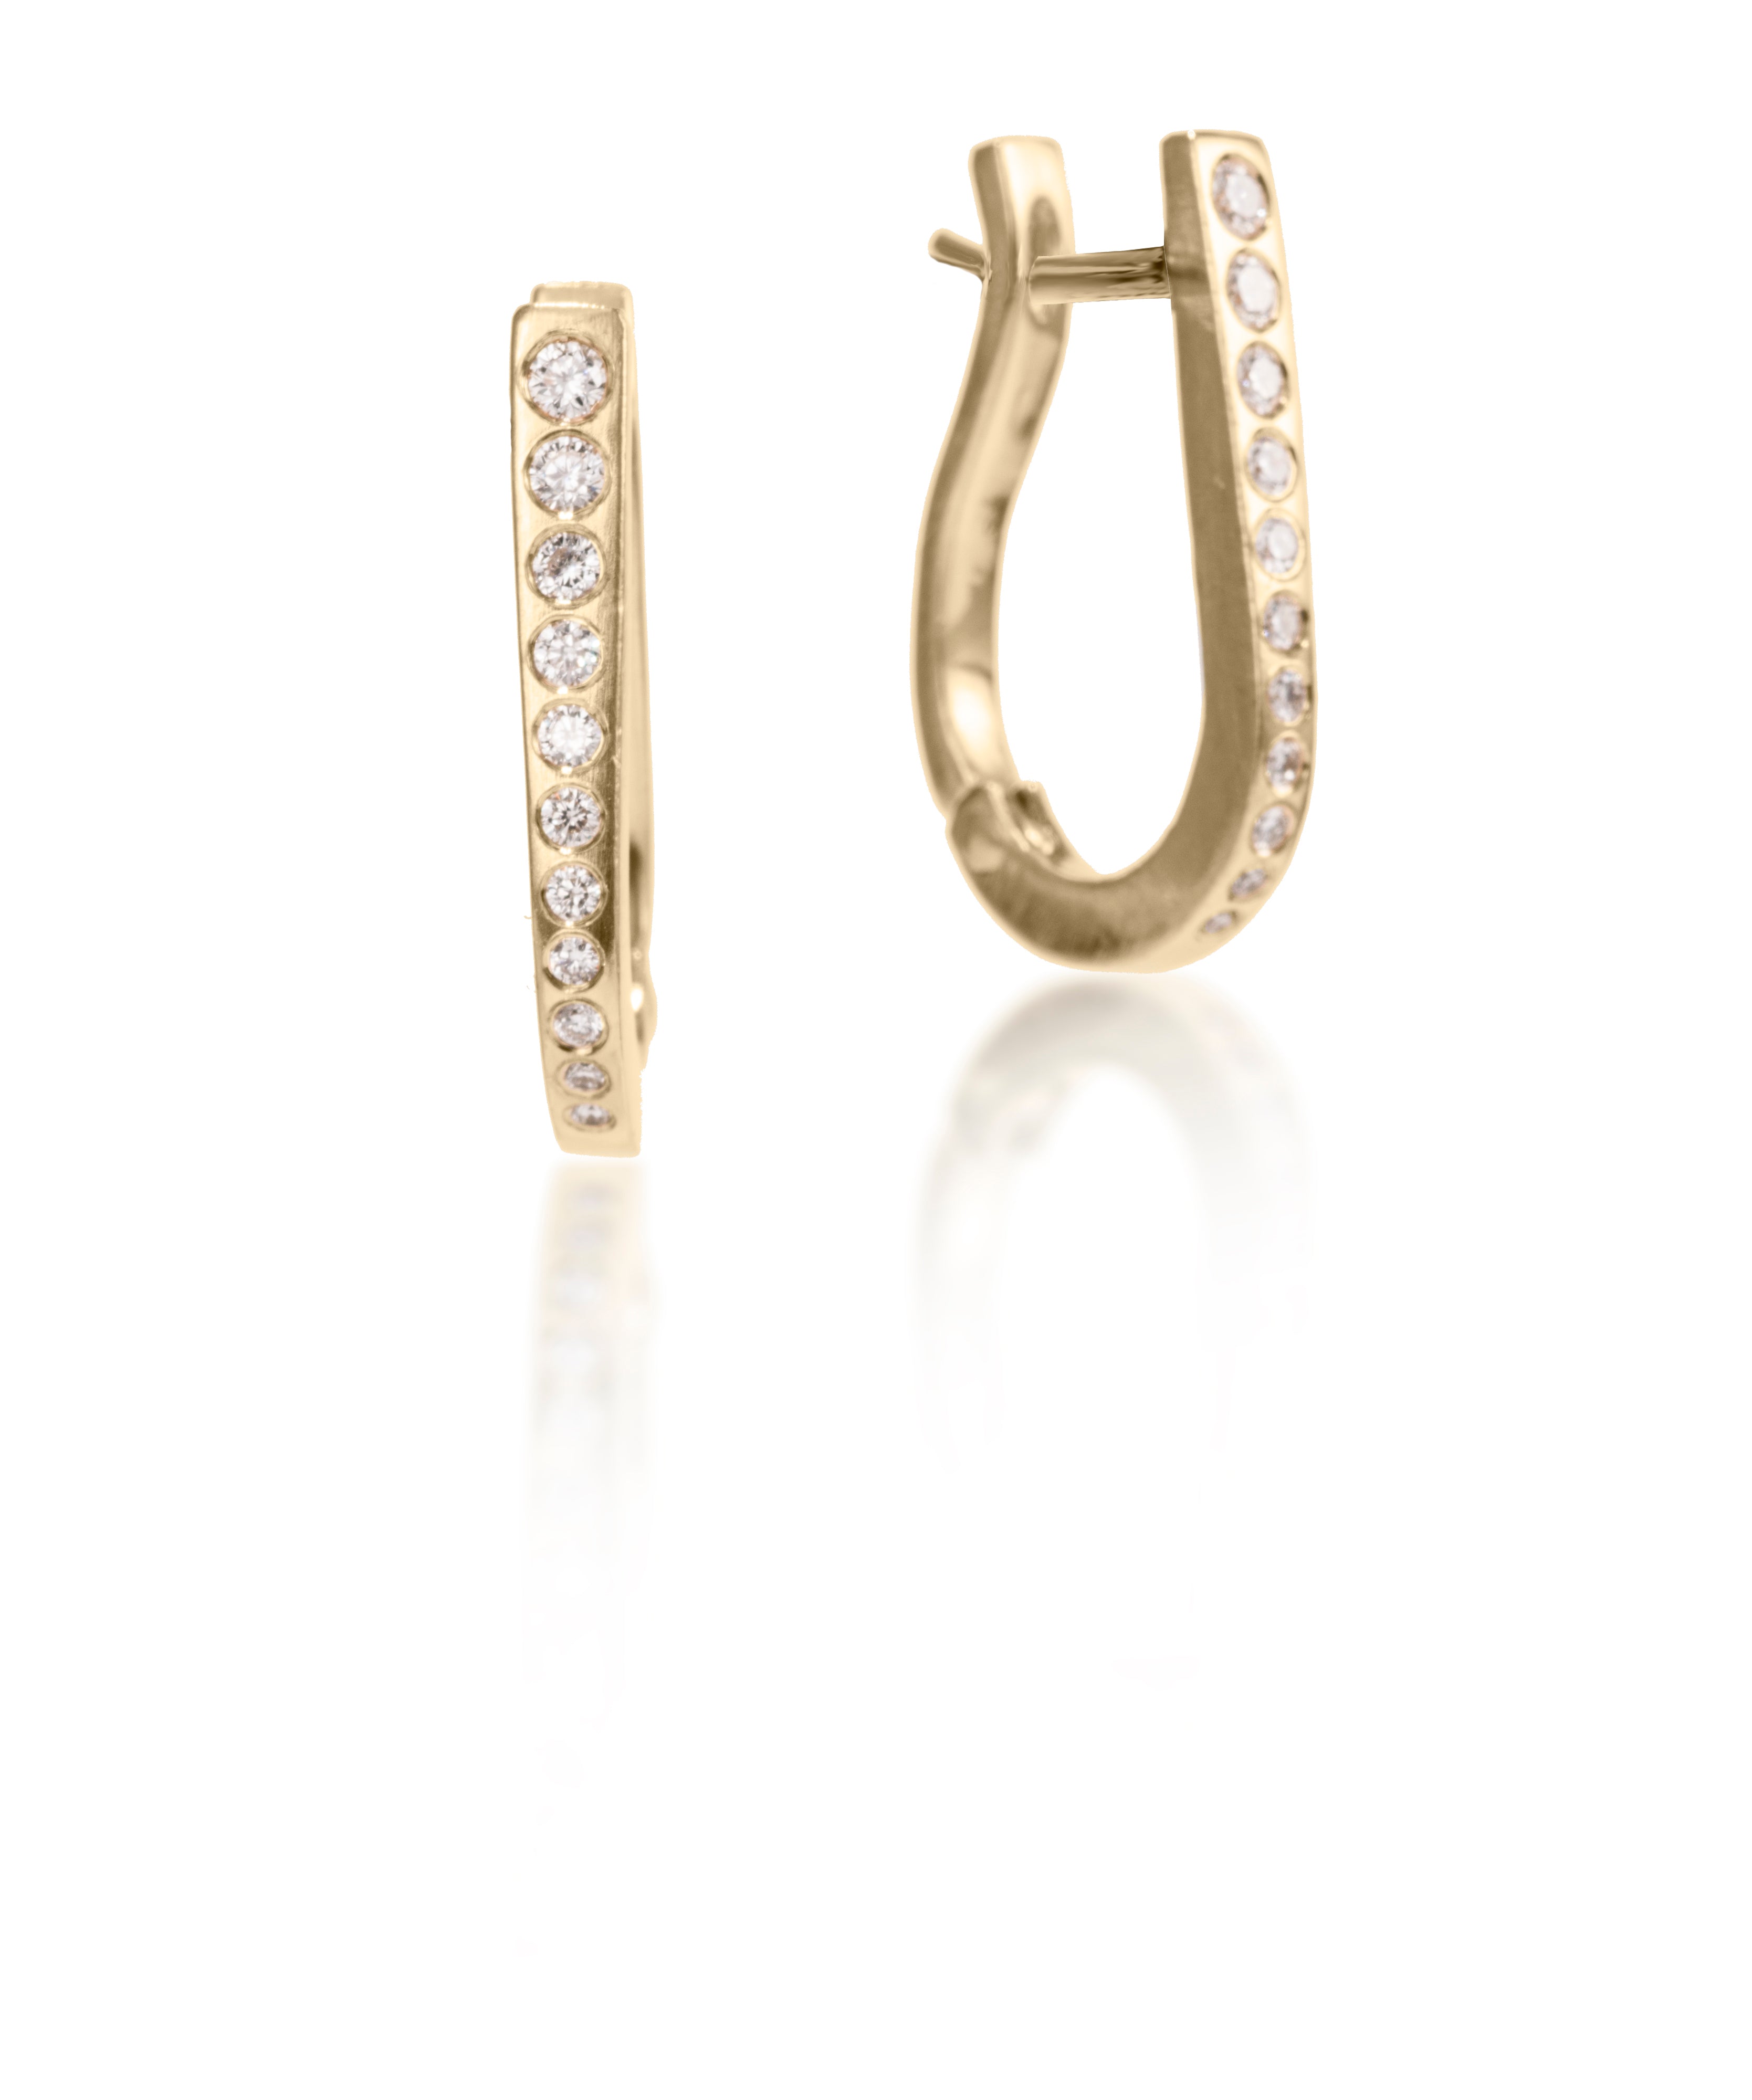 These simple, but elegant horseshoe shaped hoops are great on their own or accented with gem as a drop earring.  They feature cascading white diamonds, 0.318 tcw., and a built in closure that snaps securely closed.  Available in four color ways, oxidized silver, 18k gold, palladium or platinum.